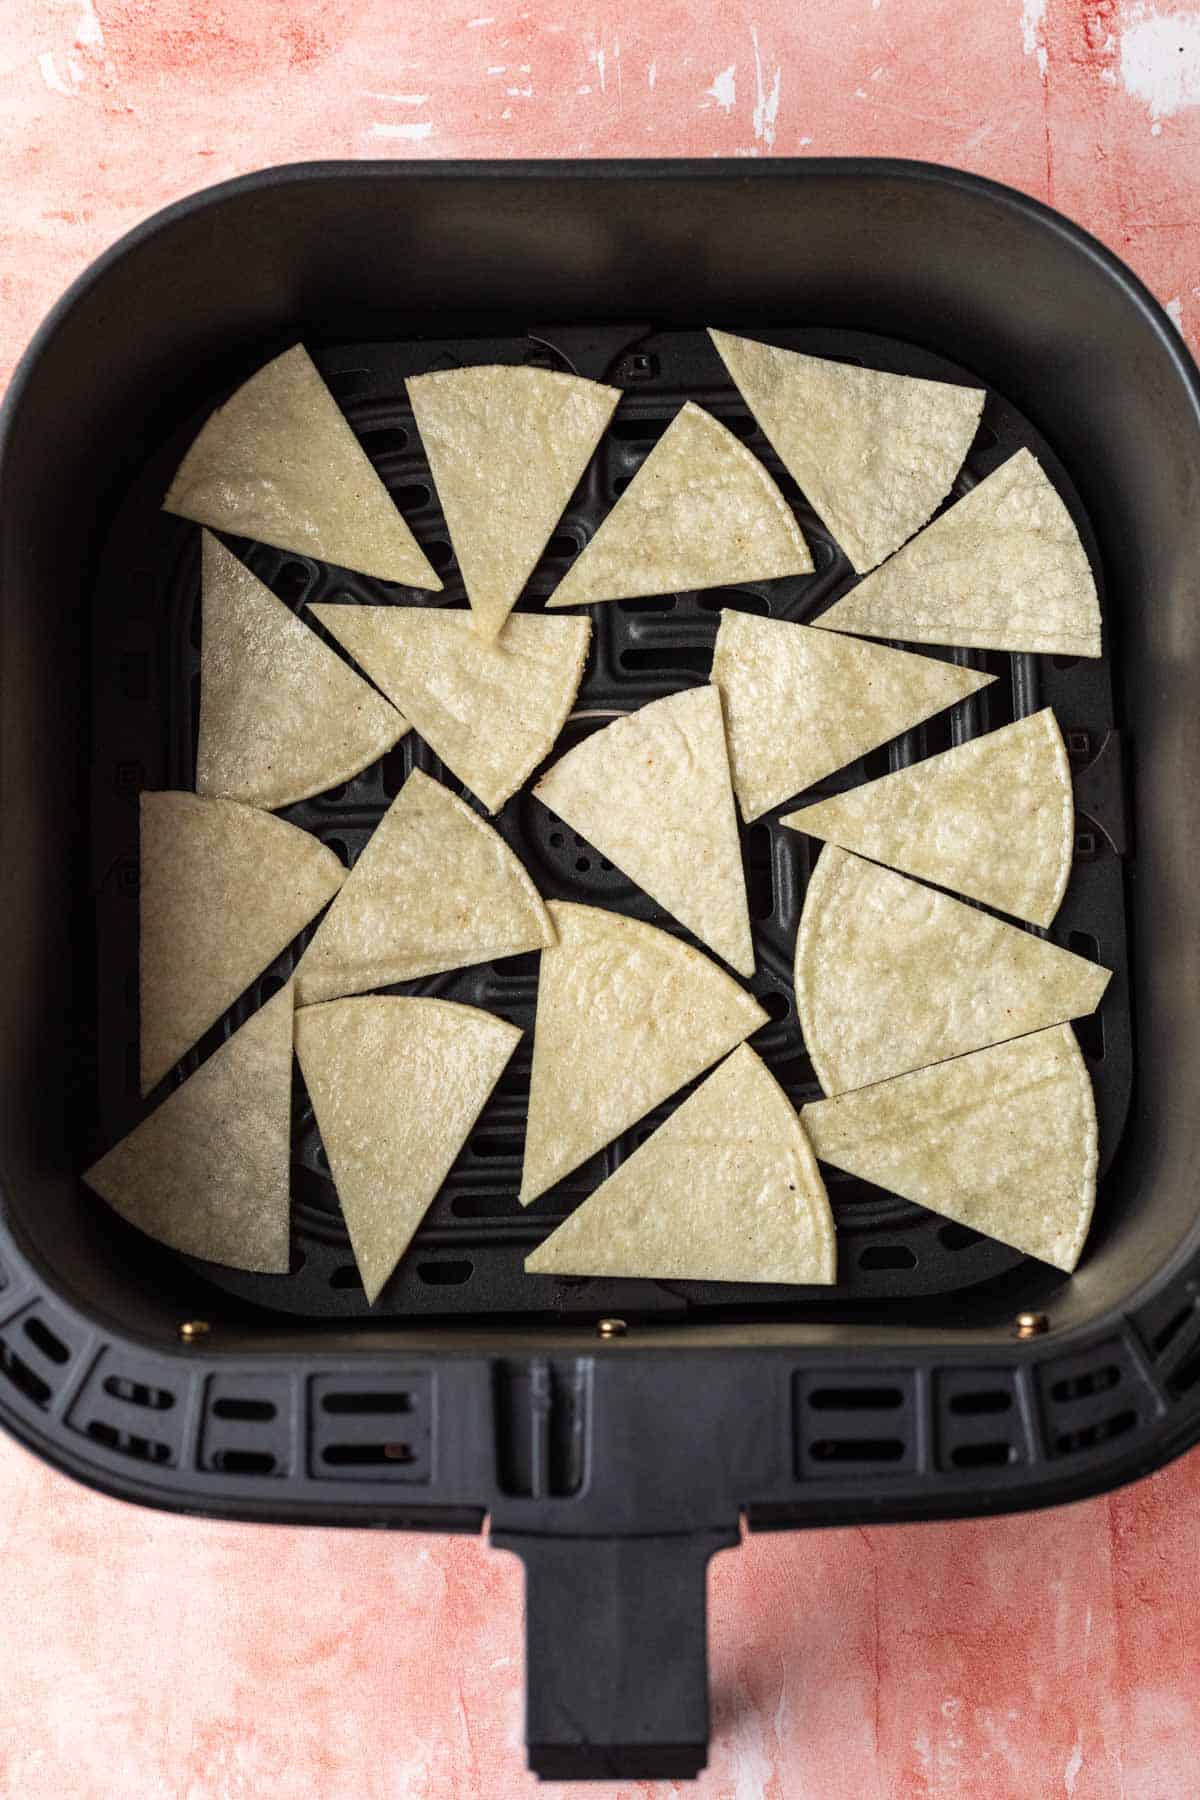 uncooked tortilla chips in the air fryer basket.